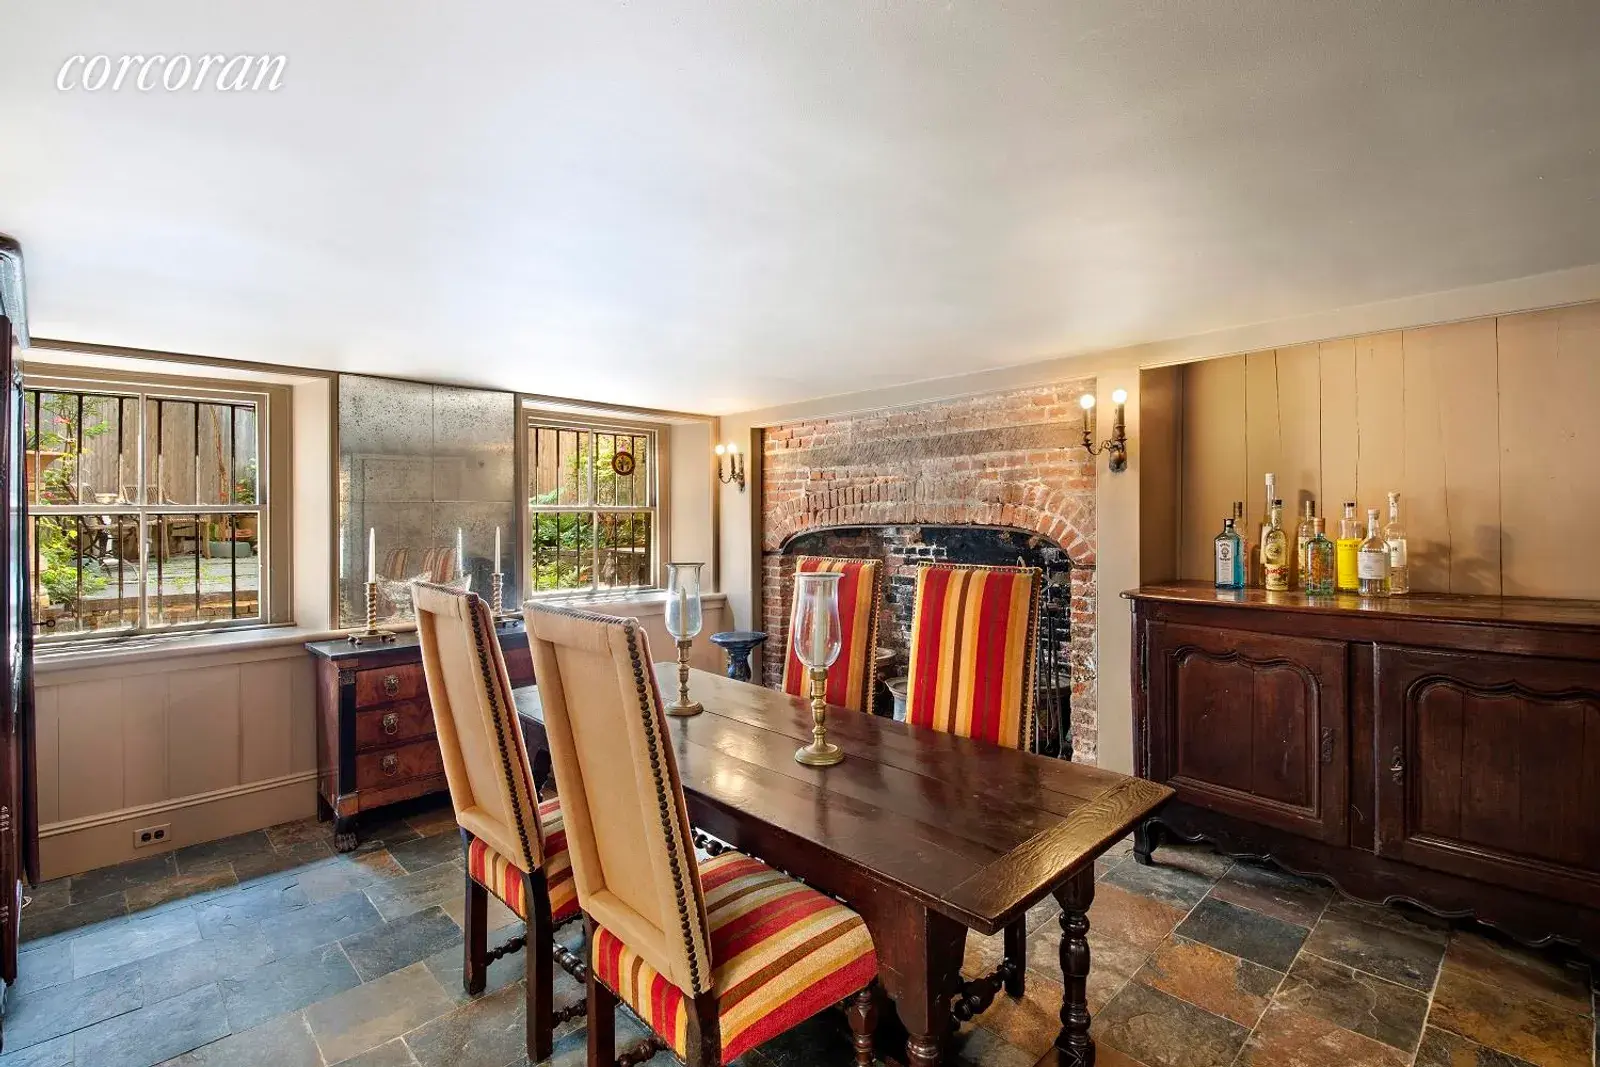 Manhattan’s Oldest Home Hits The Market For The First Time In 227 Years